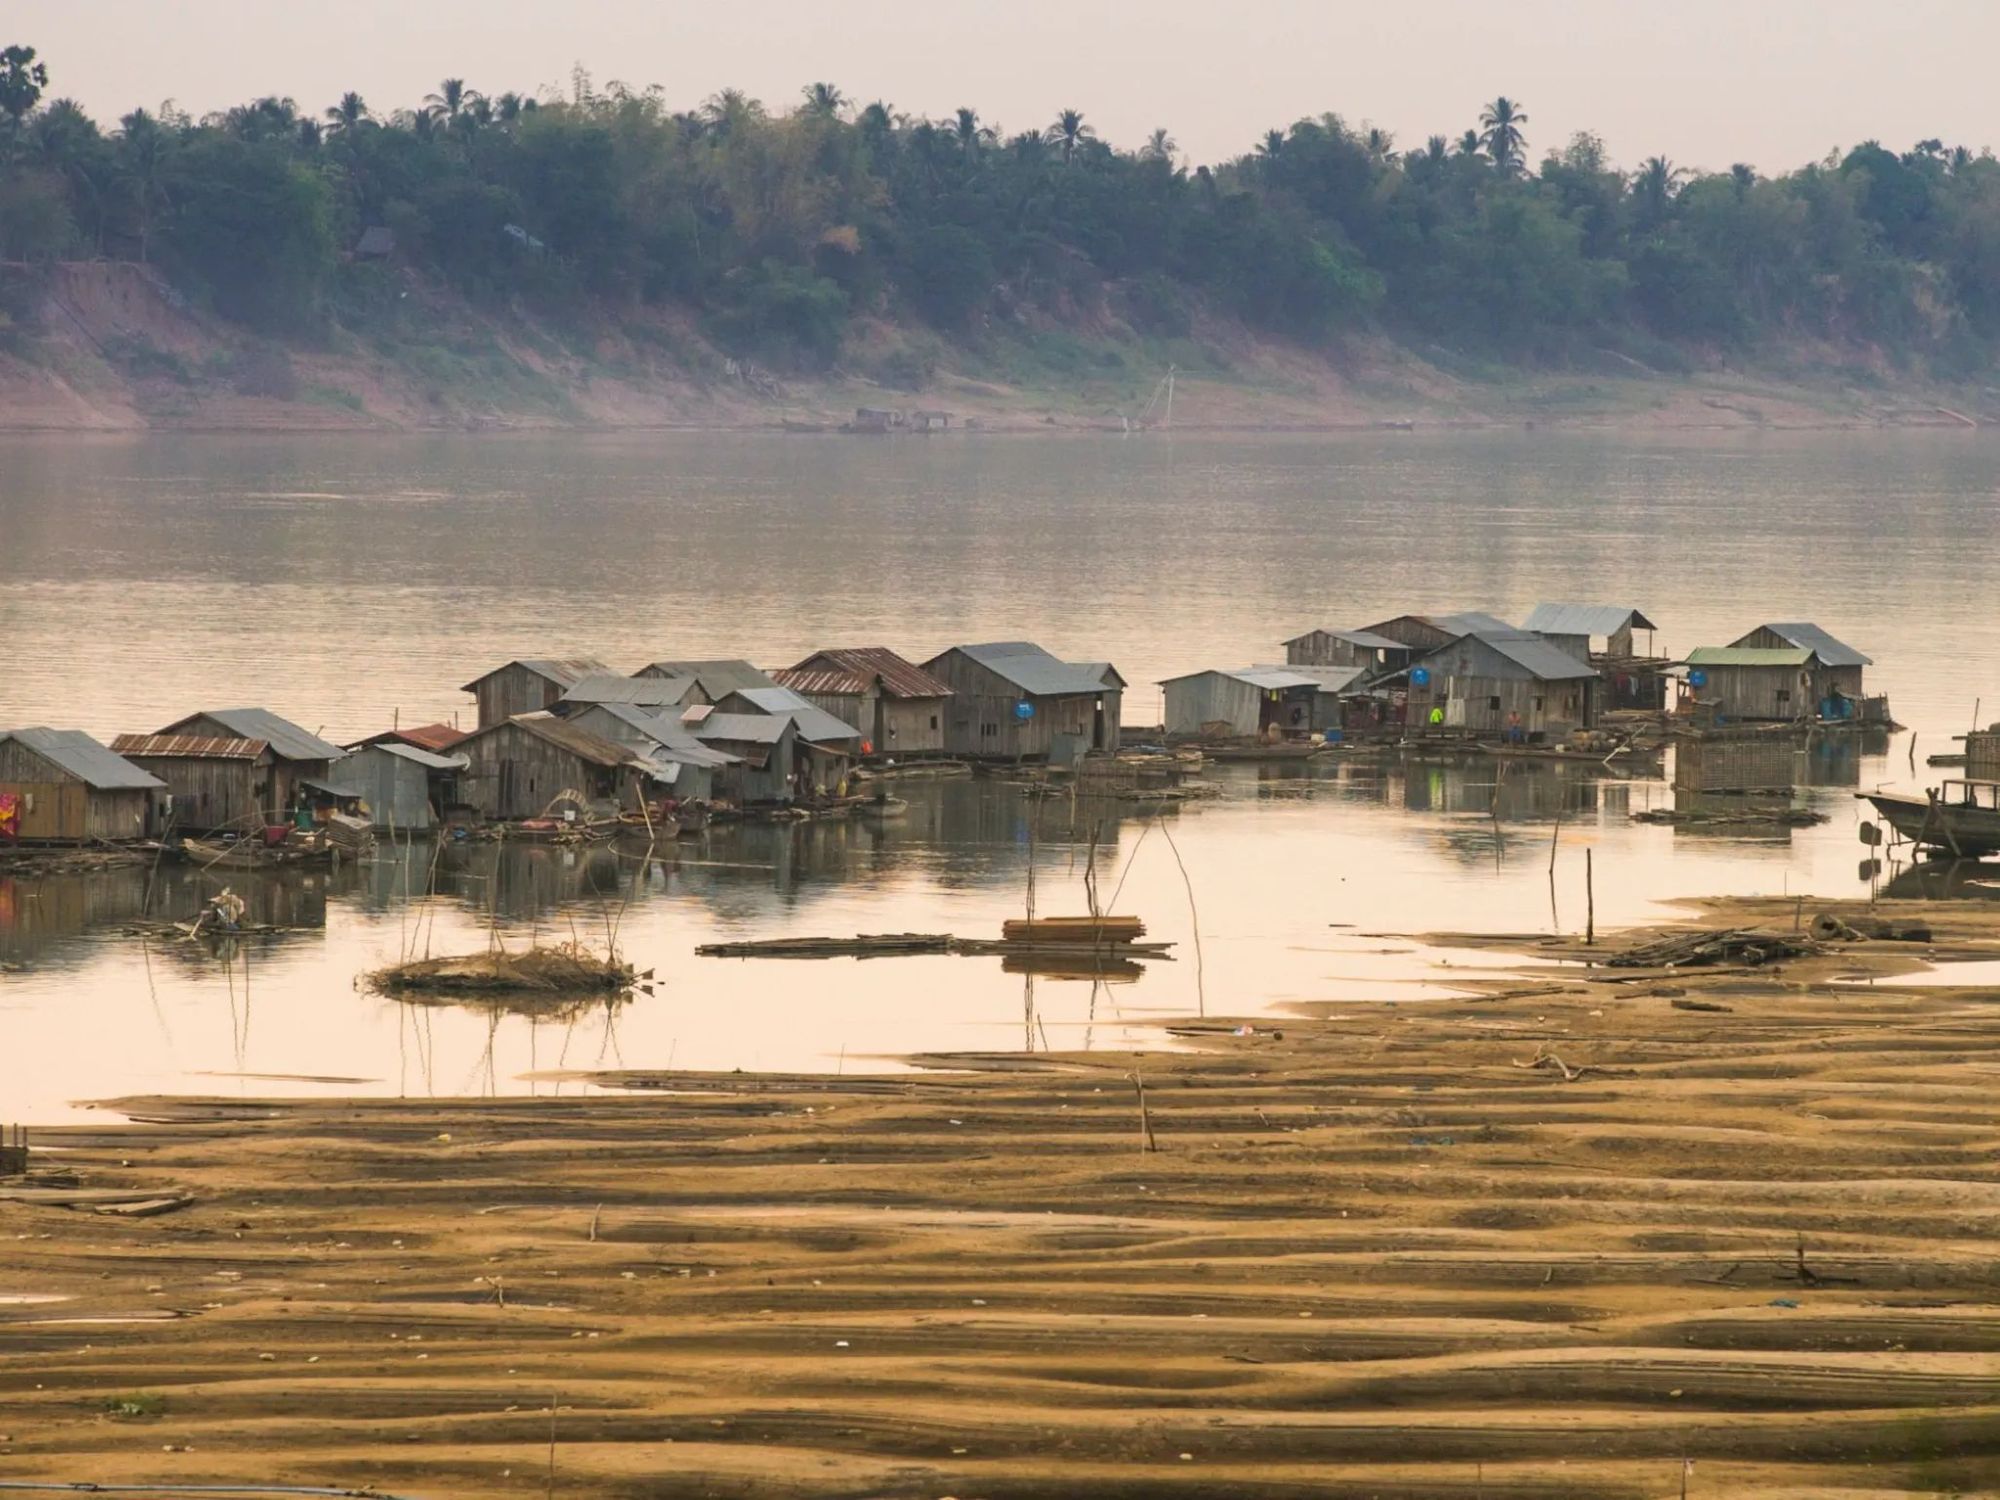 A floating village on Koh Trong, an island on the mighty Mekong river. Photos: Getty